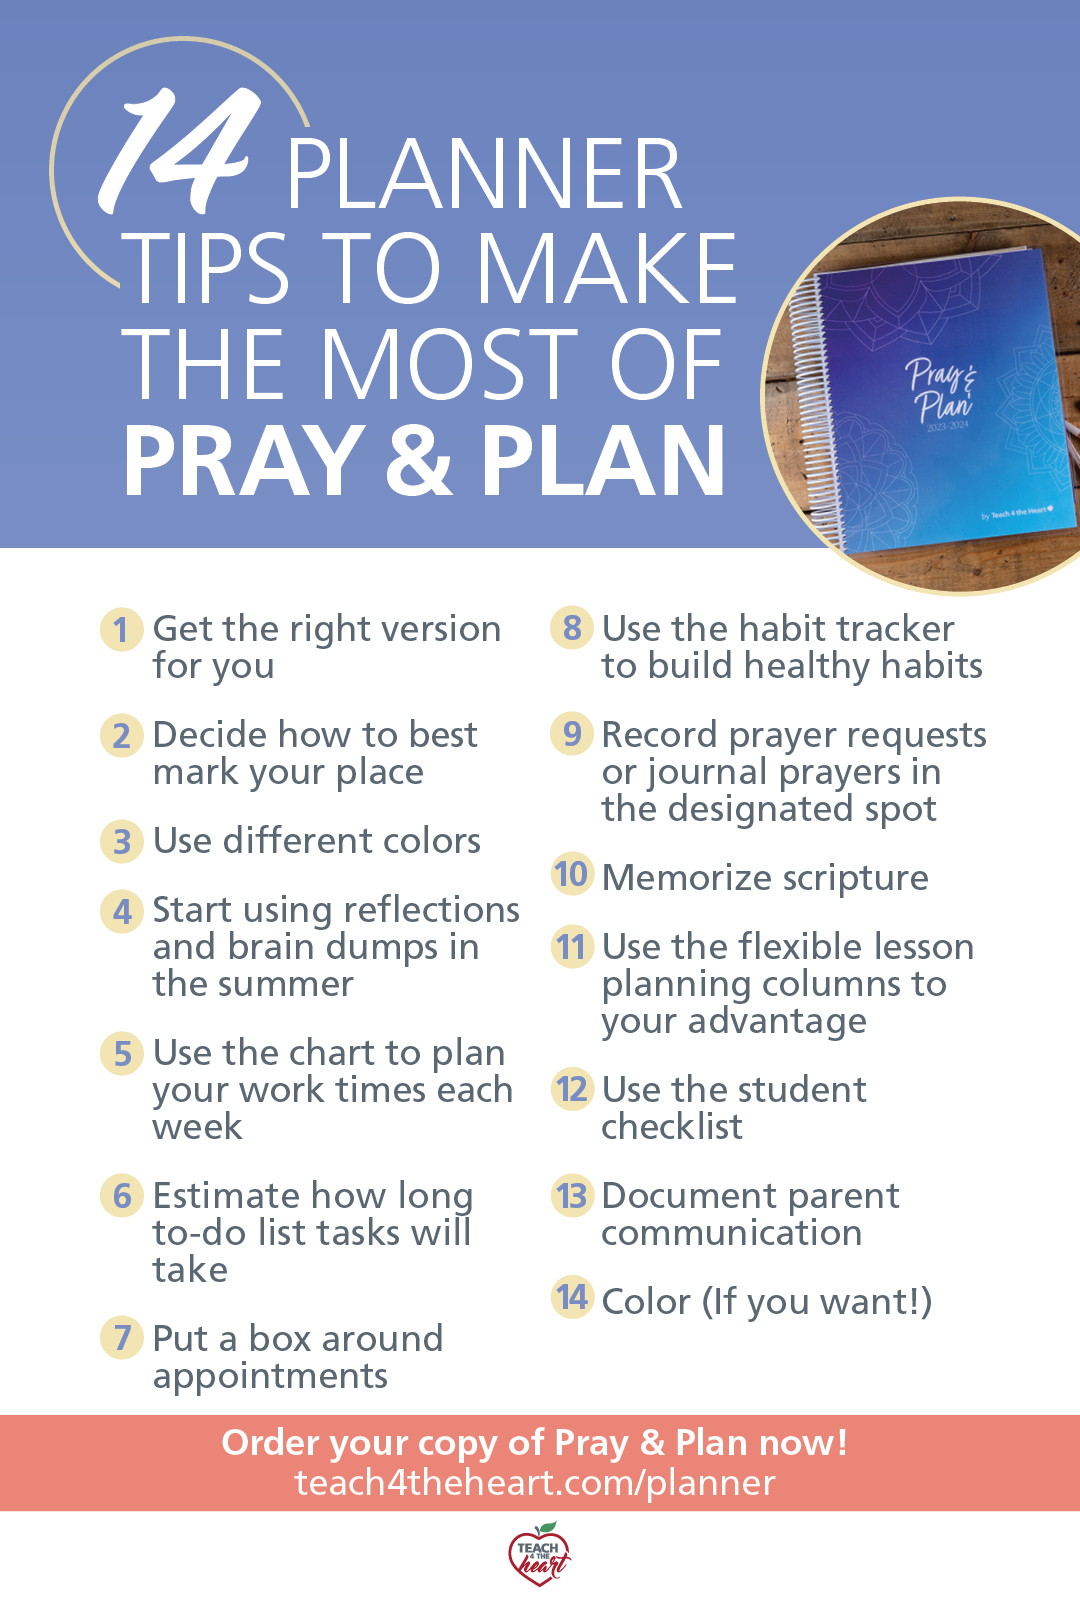 14 planner tips infographic